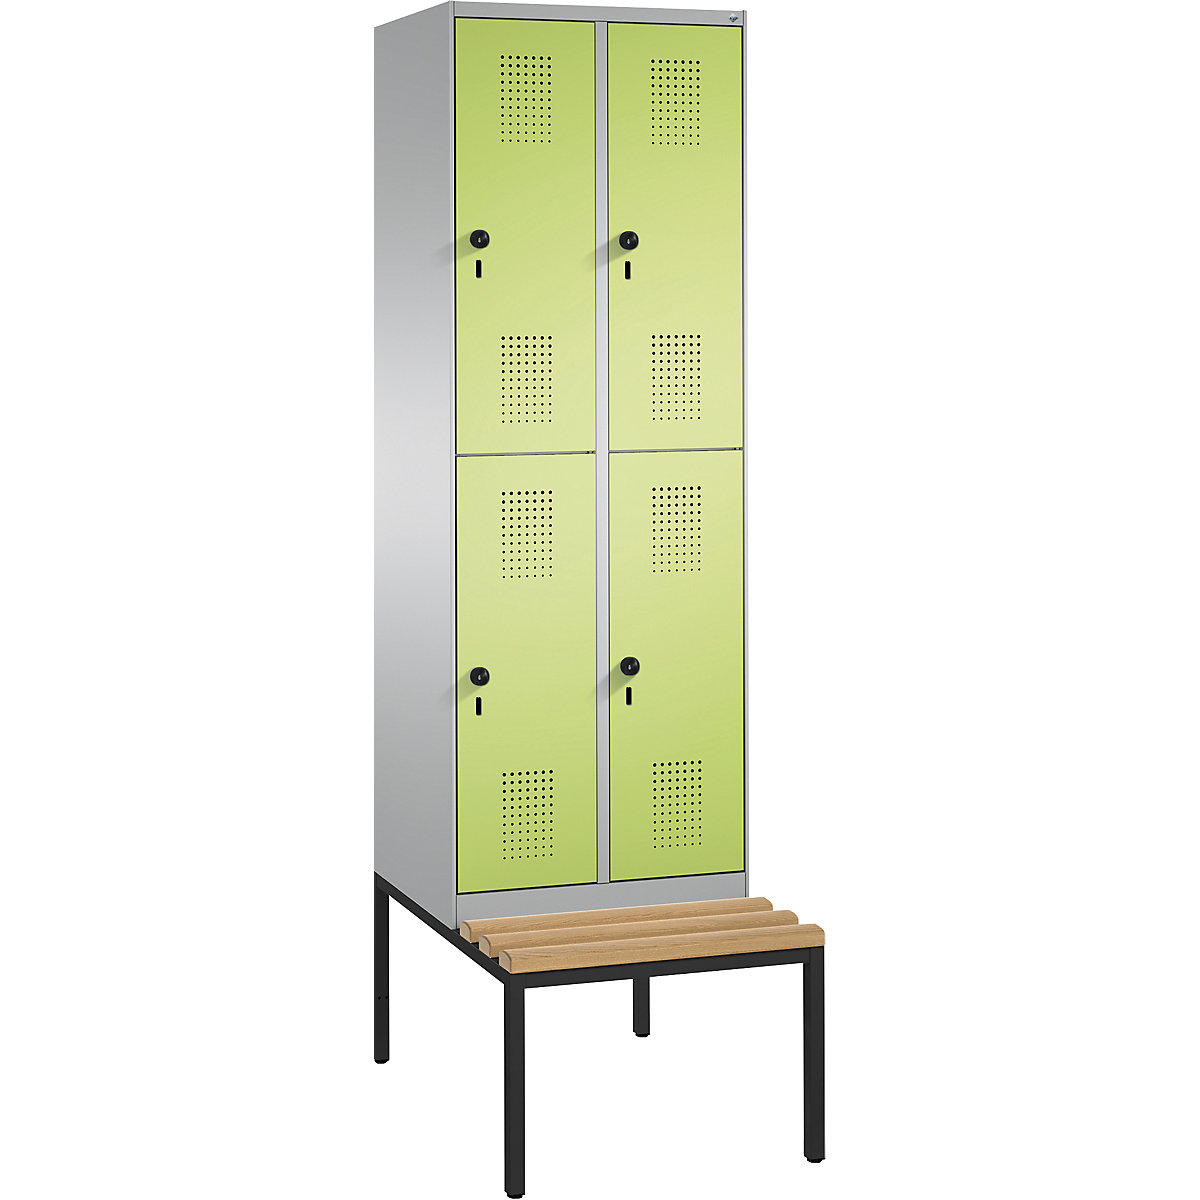 EVOLO cloakroom locker, double tier, with bench – C+P, 2 compartments, 2 shelf compartments each, compartment width 300 mm, white aluminium / viridian green-5